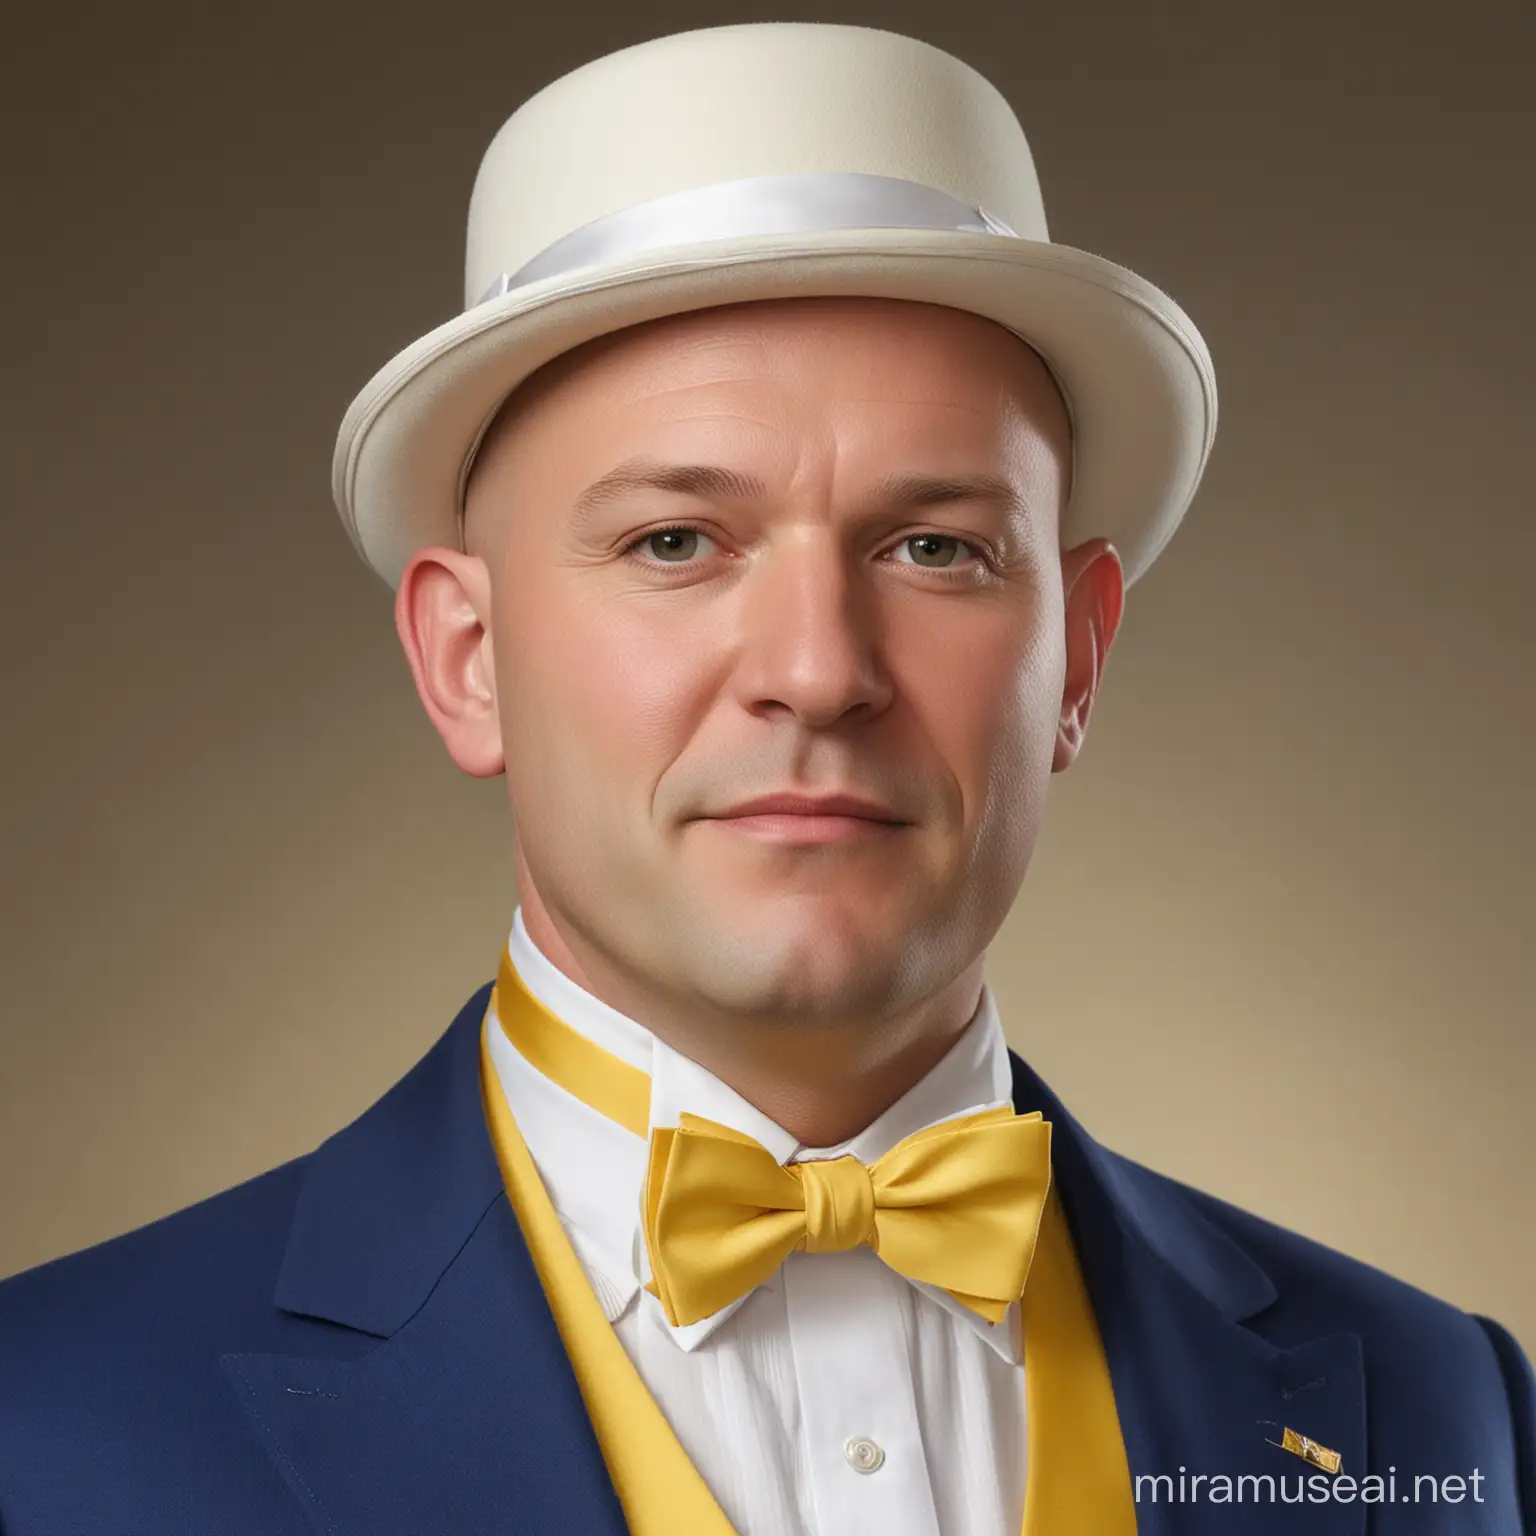 Stylish Bald Man in Blue Suit with Yellow Vest and White Bowtie